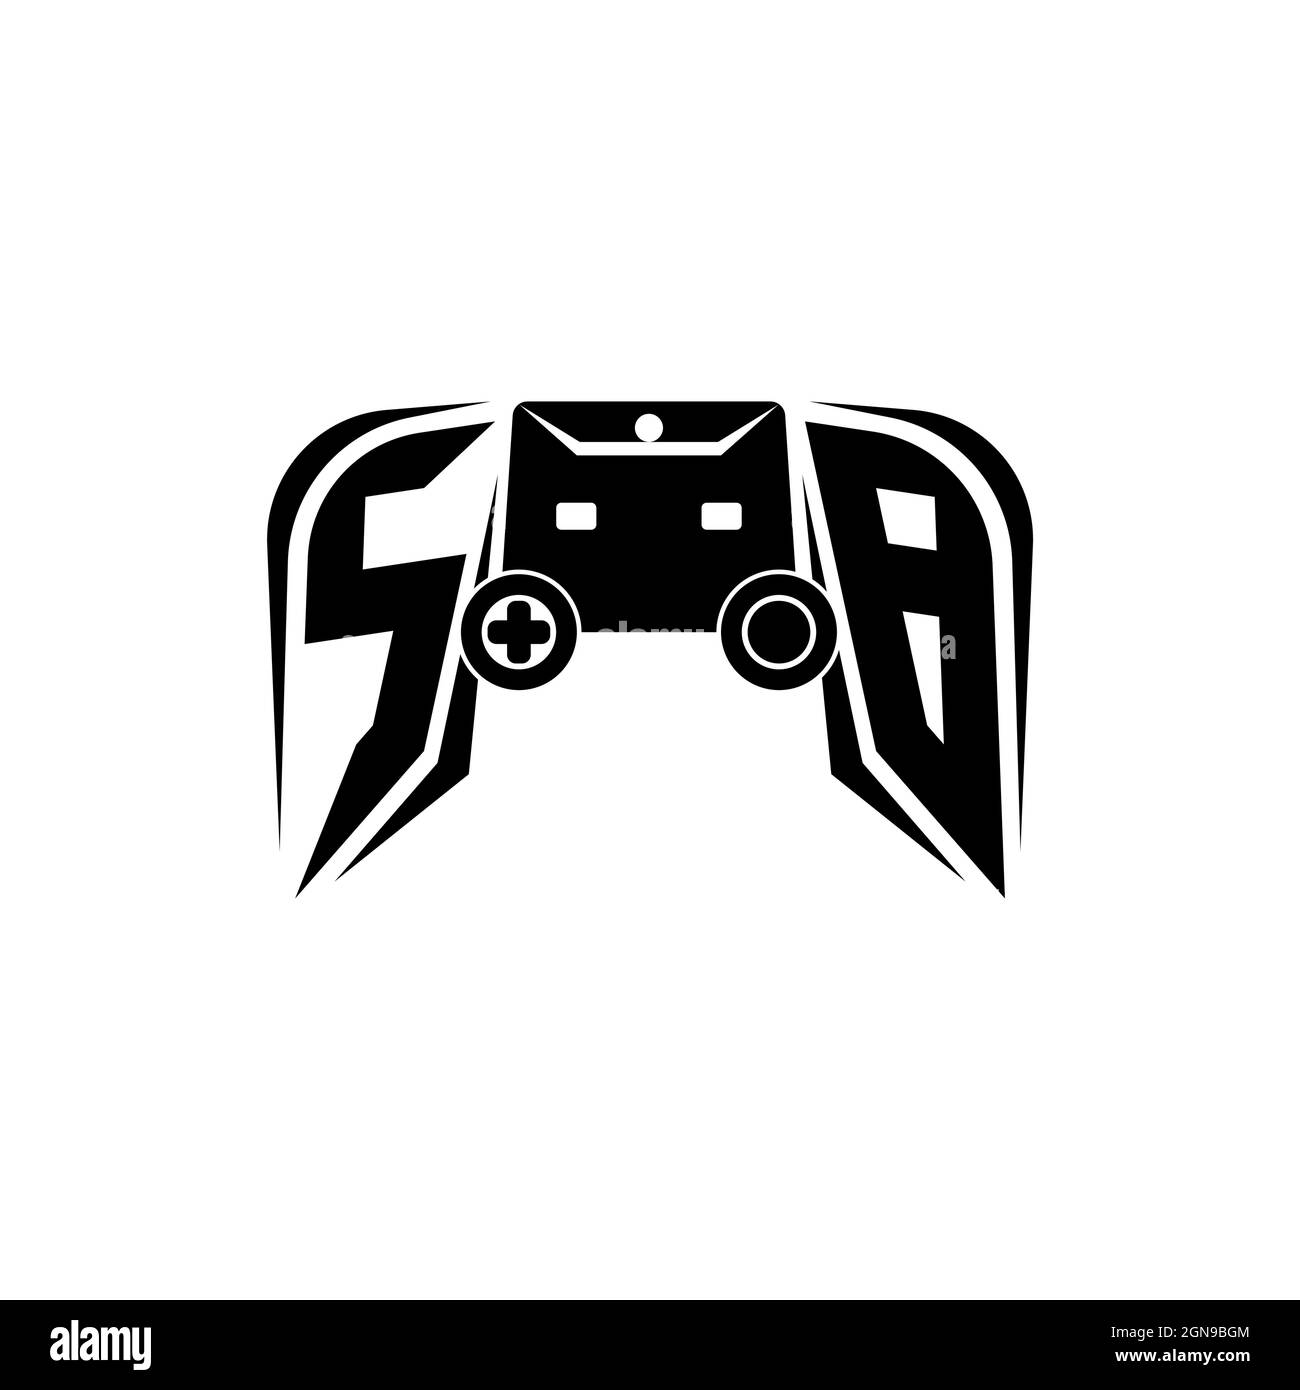 SB Initial ESport gaming logo. Game console shape style vector template Stock Vector